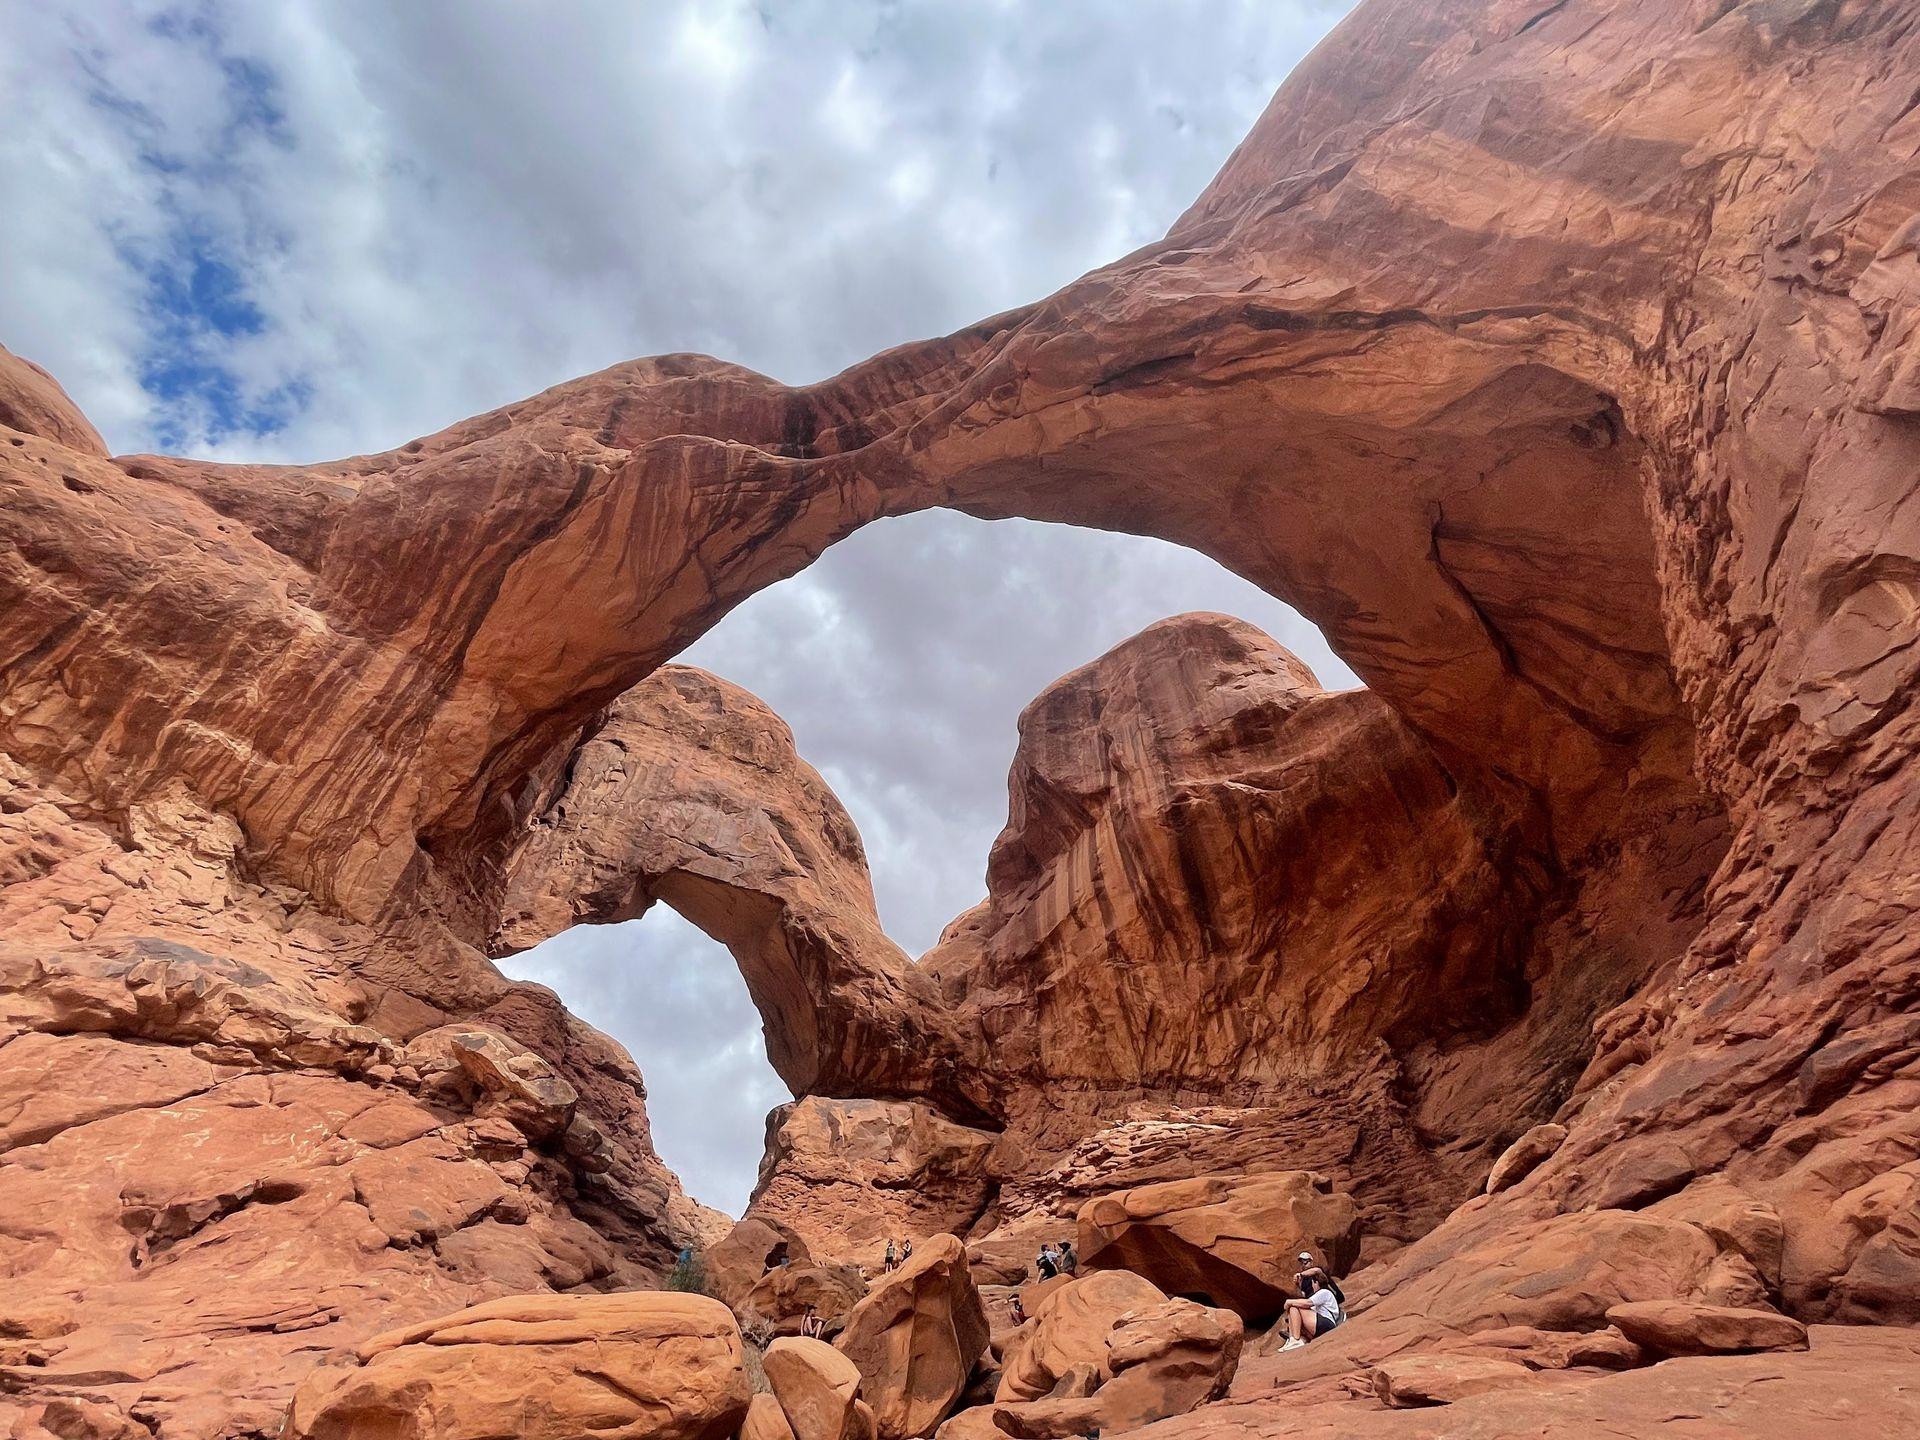 Looking up at two giant arches that seem to stem from the same point.